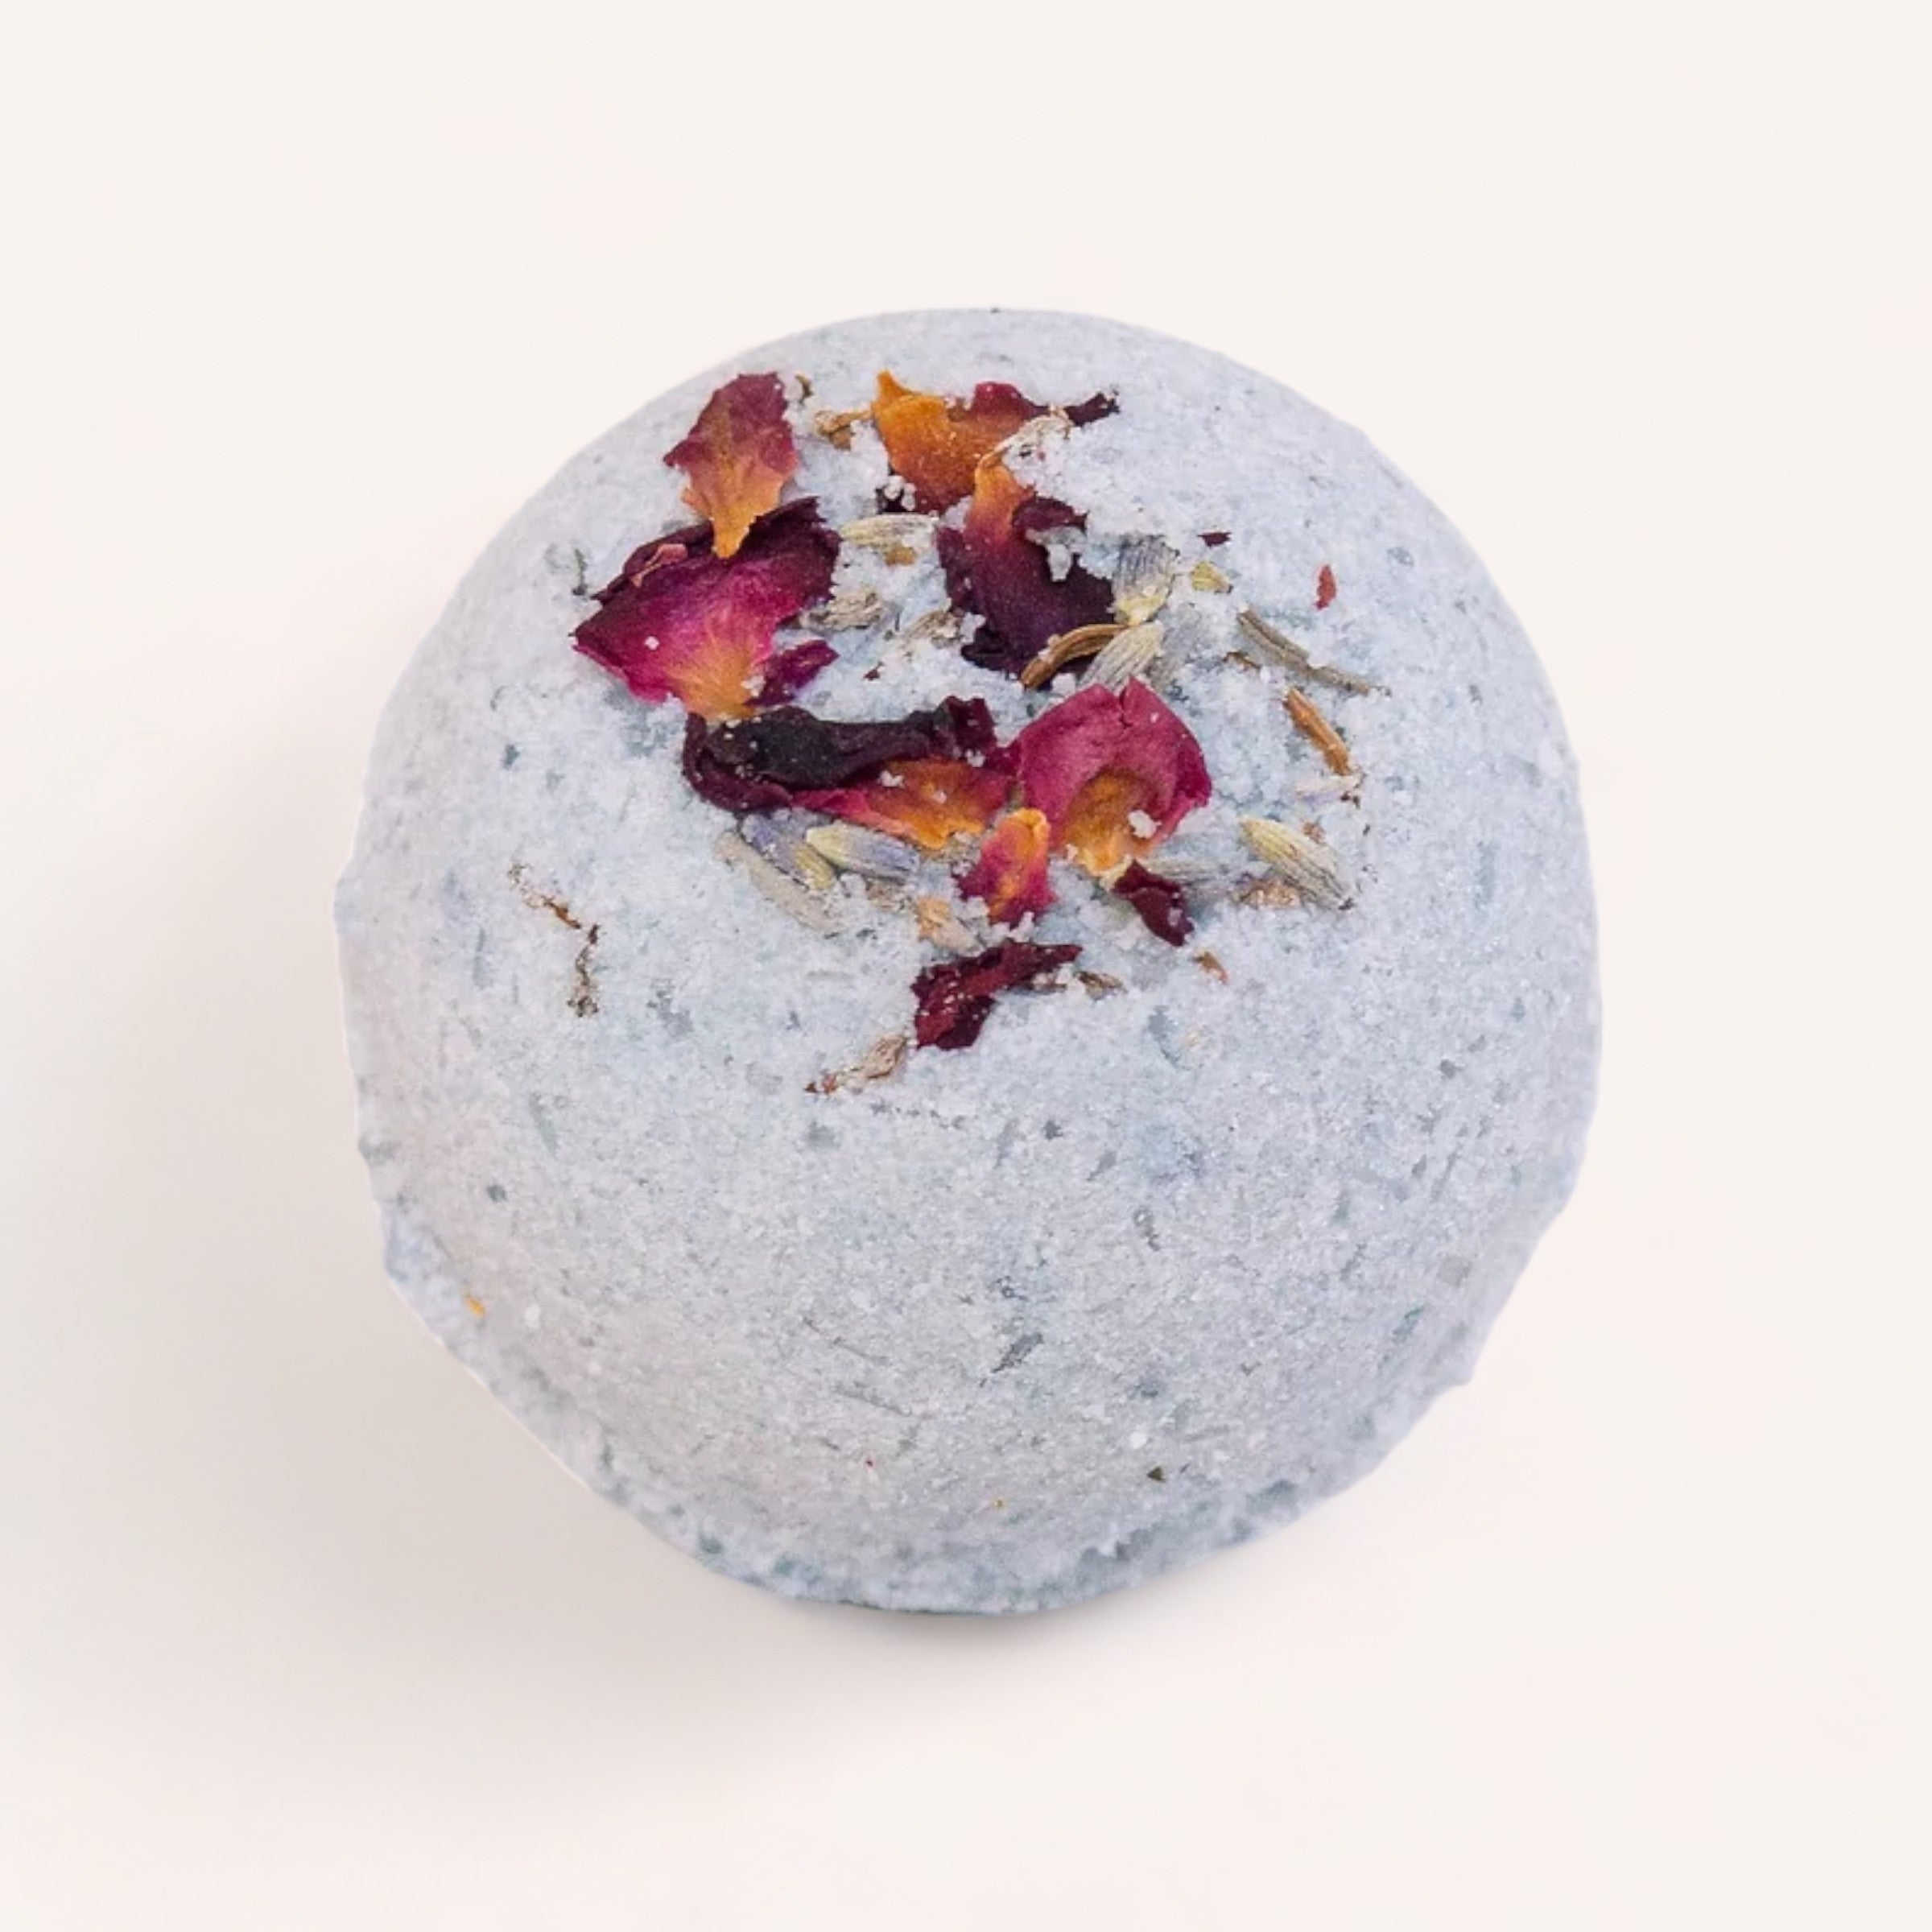 A single Midnight Garden Bath Bomb by Botanical Skin Care with dried petals on a white background.